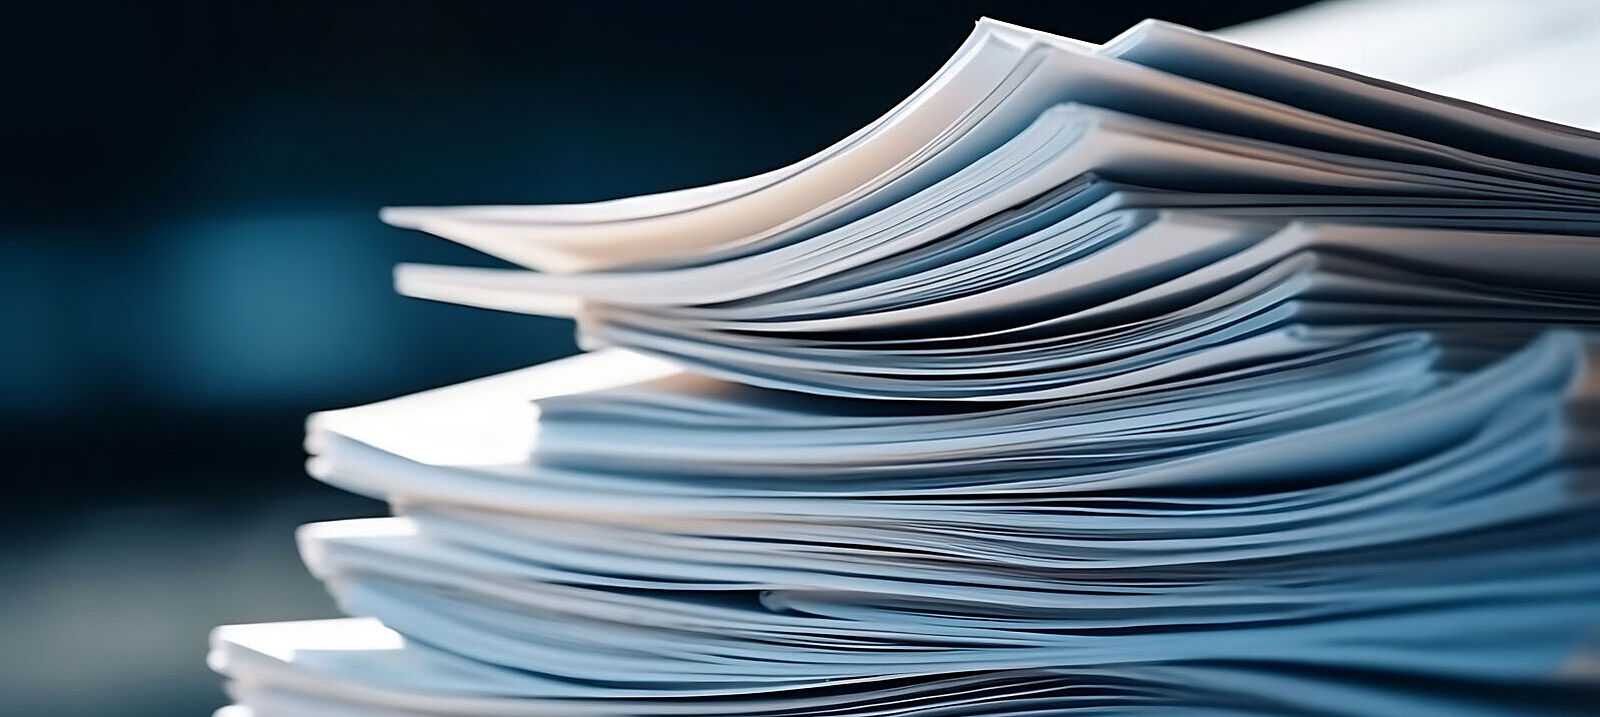 Symbolic image shows pile of paper.